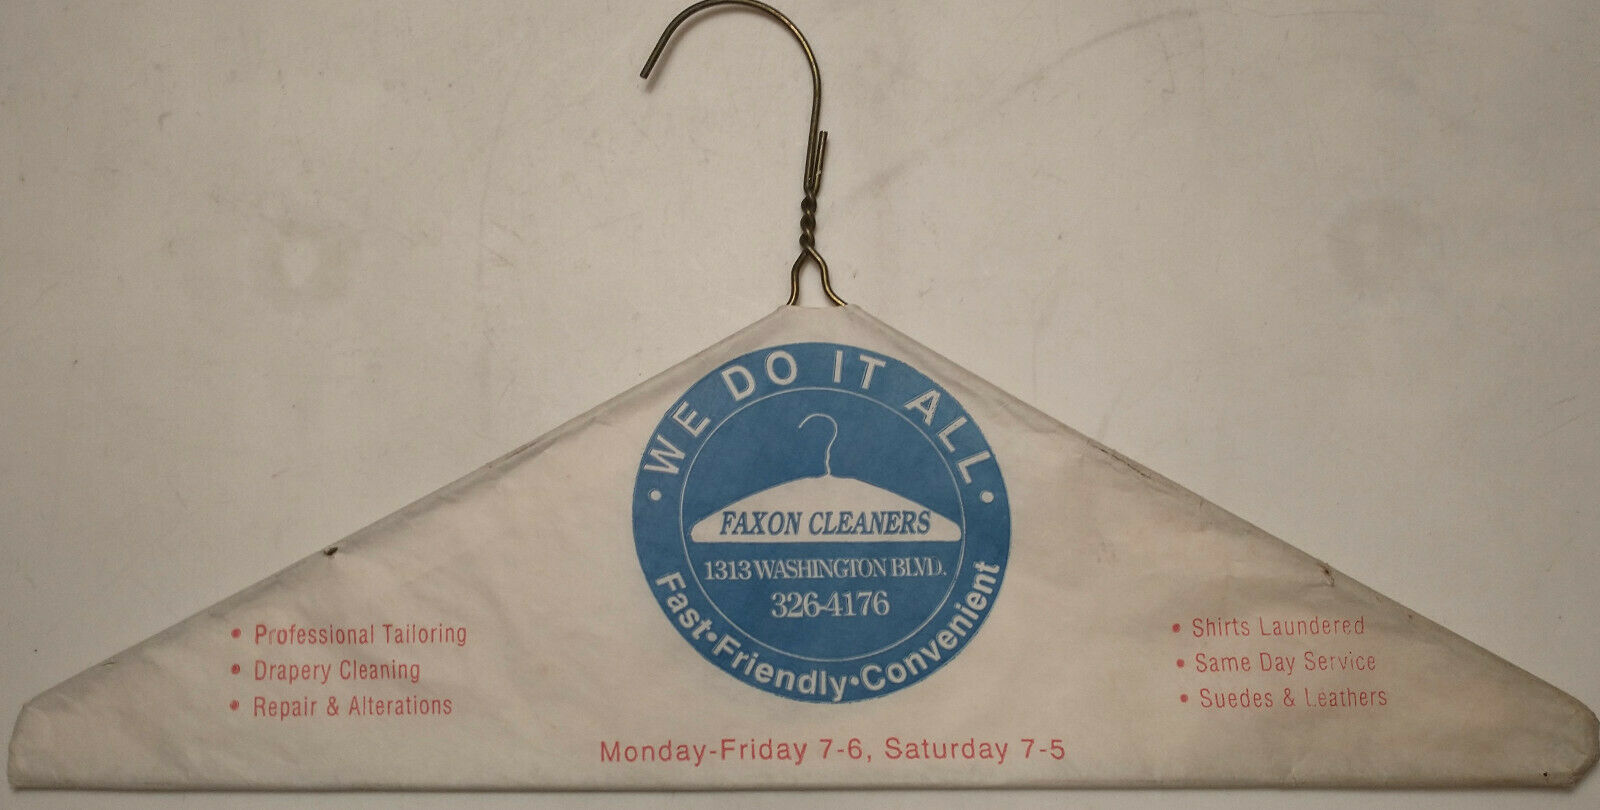 Faxon Cleaners - Williamsport, Pa - Vintage Paper-covered Dry Cleaner Hanger